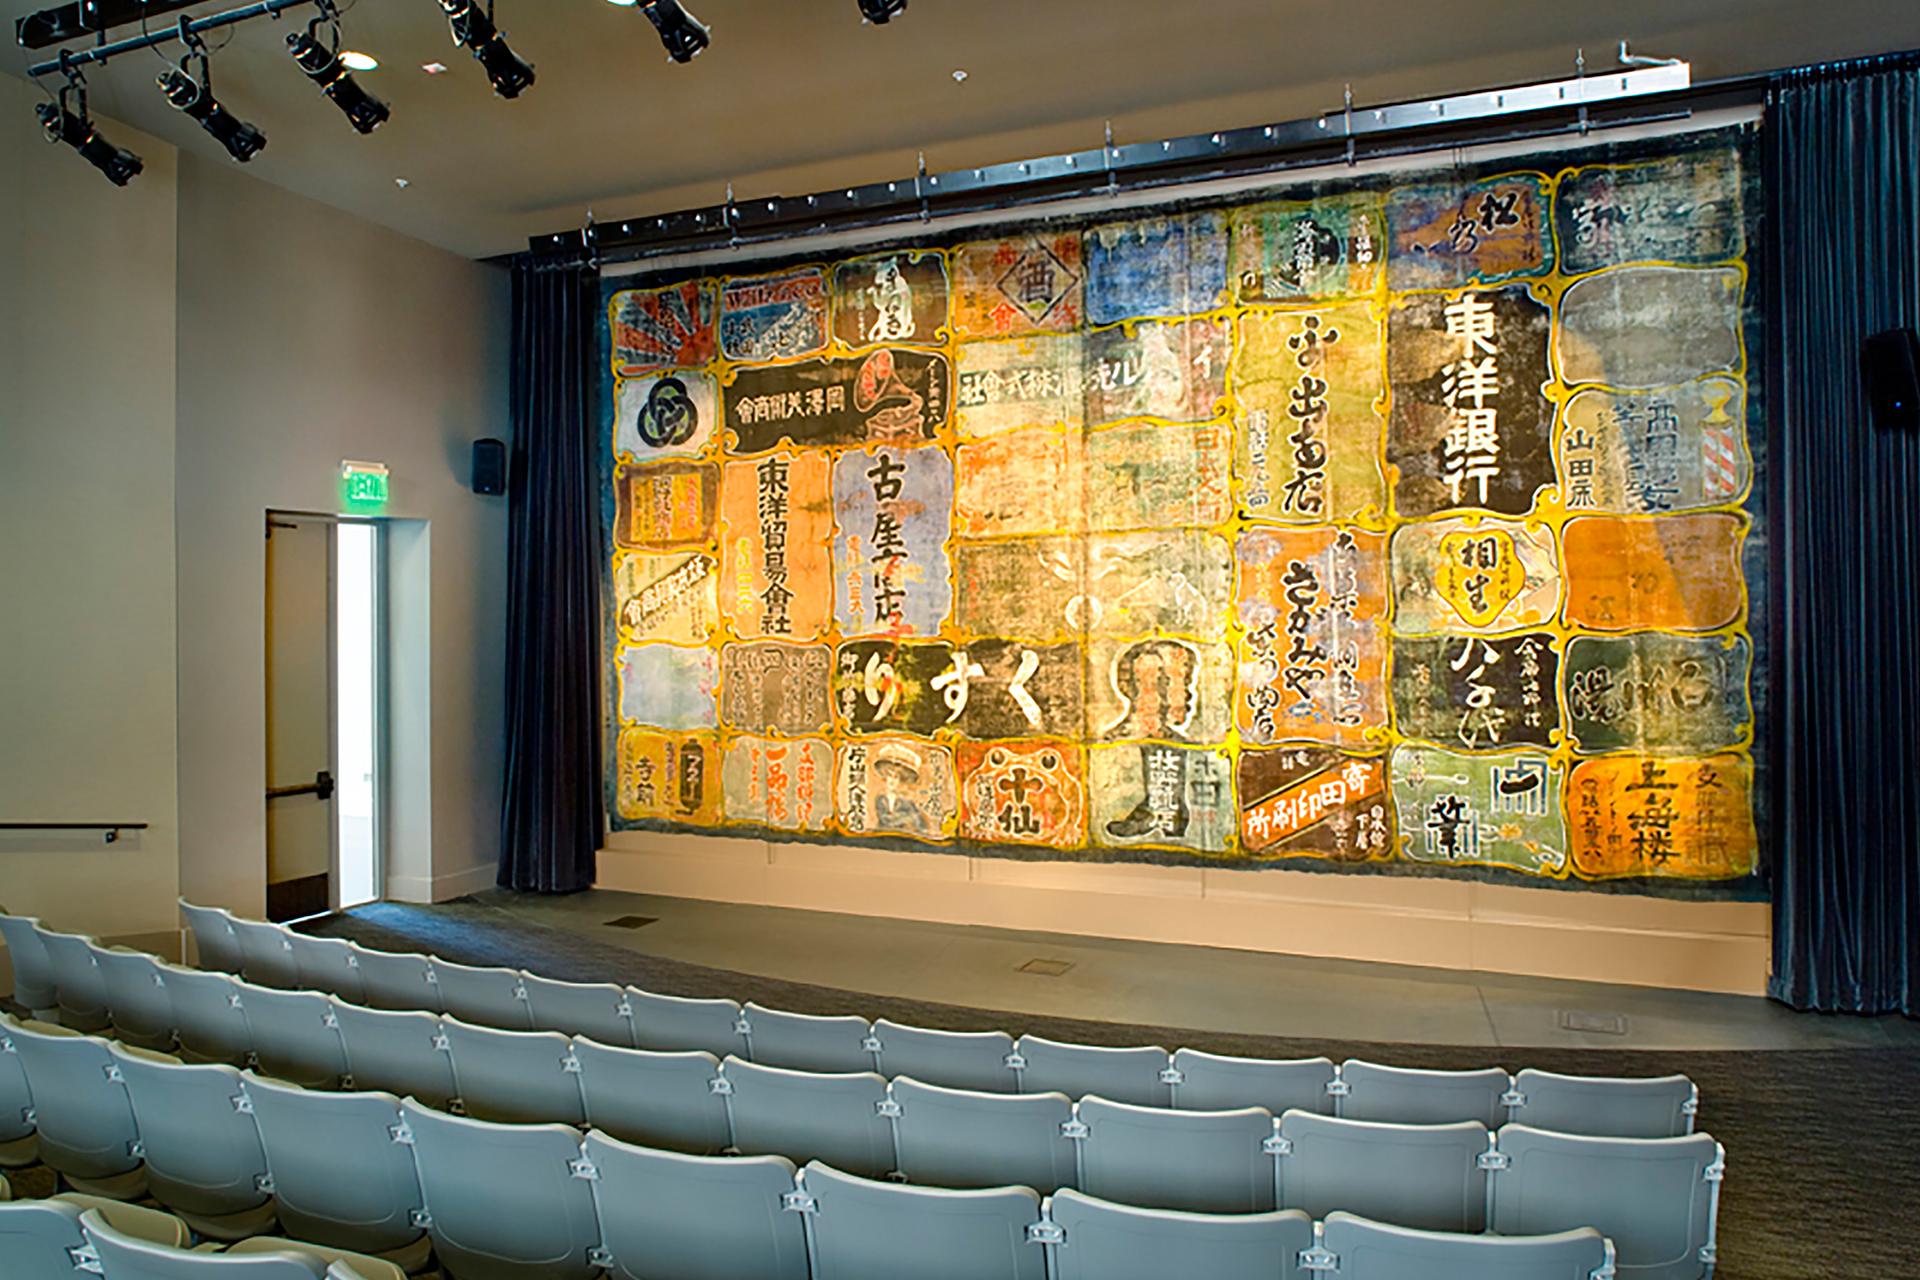 An auditorium at the Wing Luke Museum features a small stage and rows of seating.